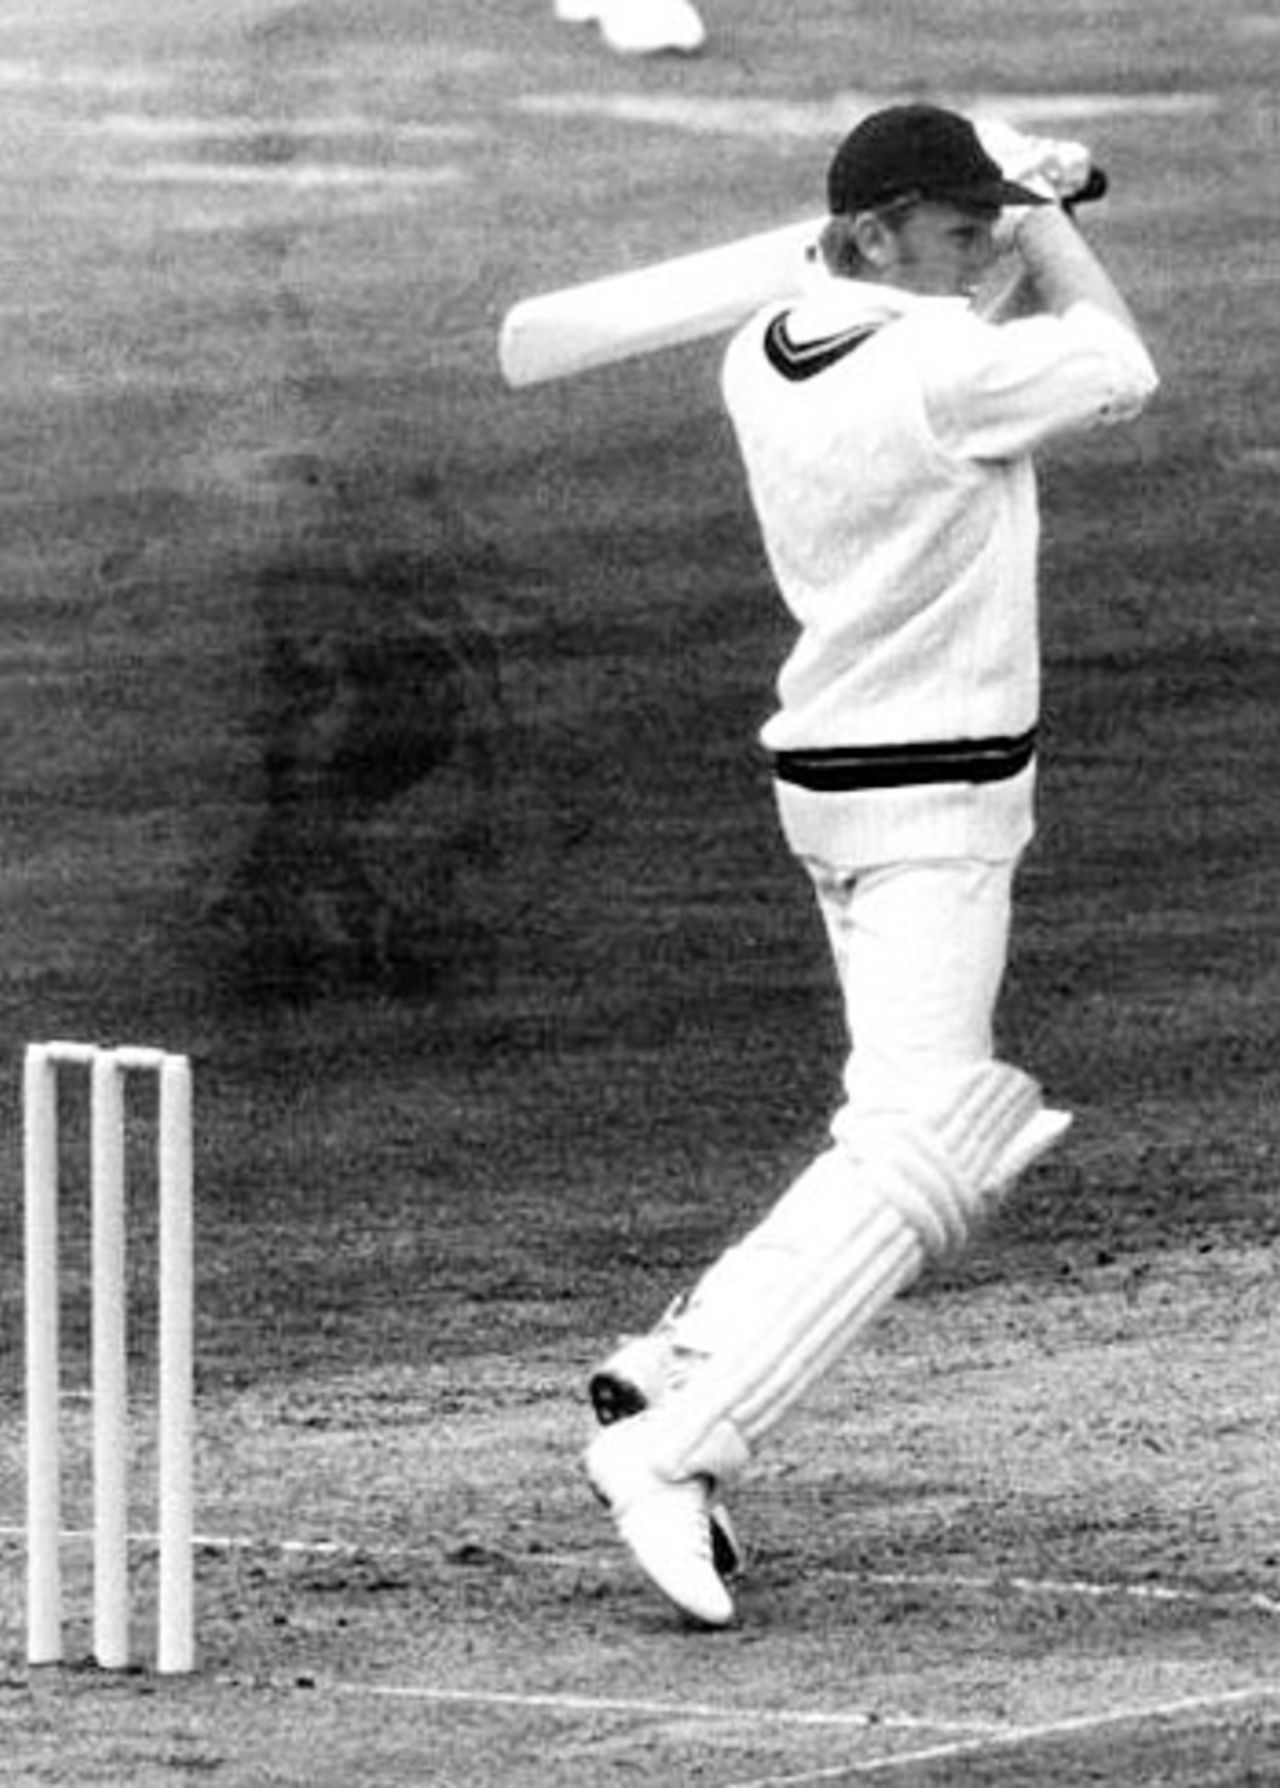 Barry Richards on the attack, England v Rest of the World, Lord's, June 17, 1970